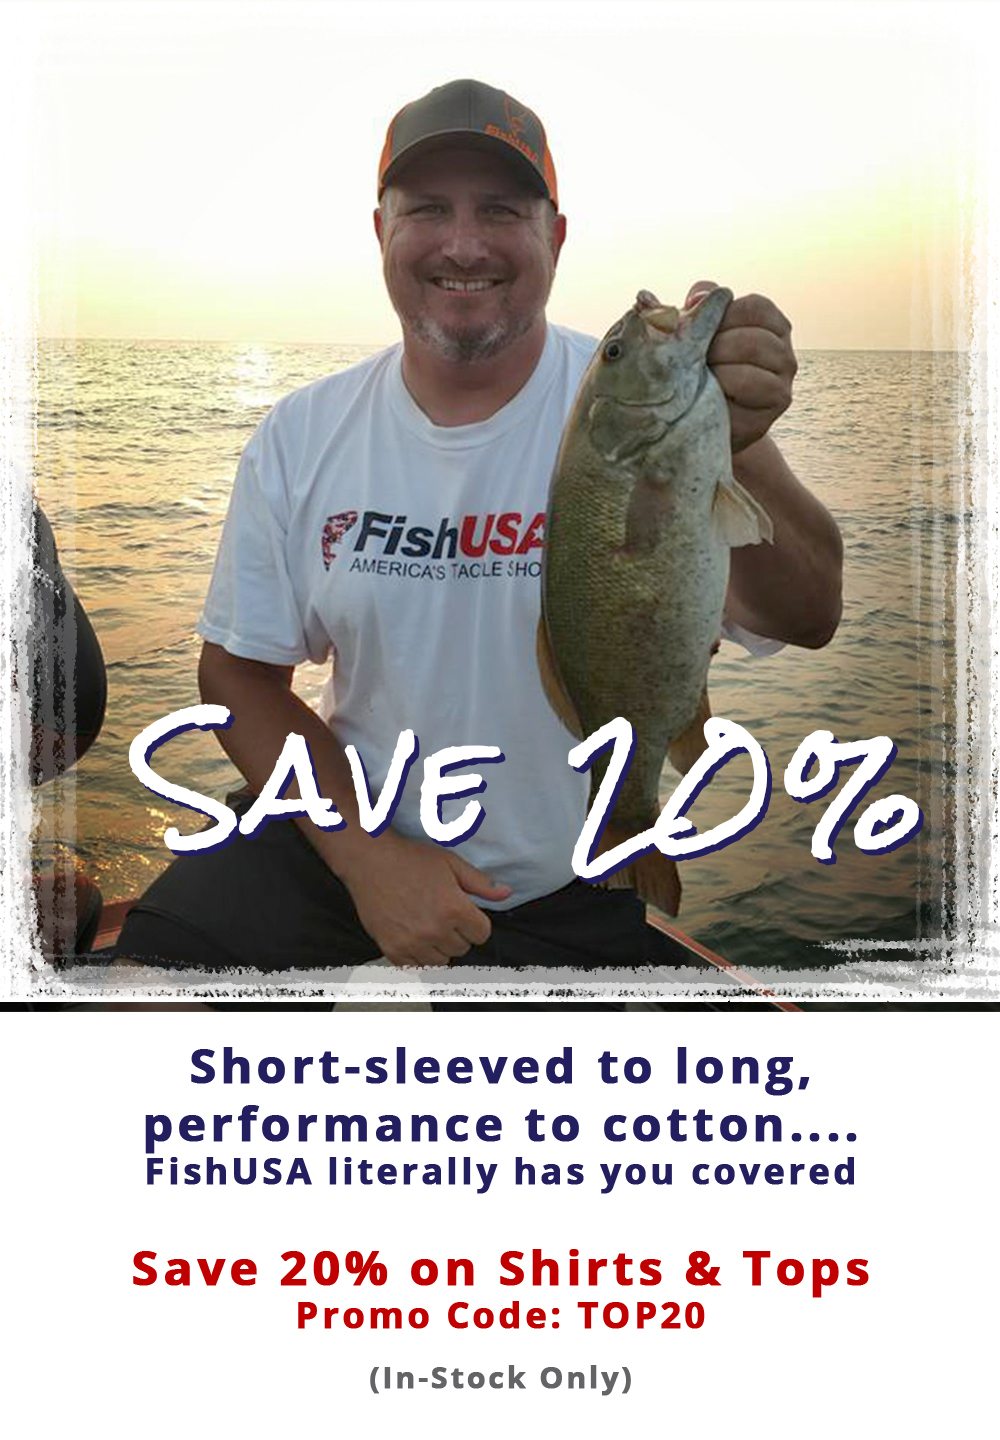 Save 20% on your Shirt or Top purchase!